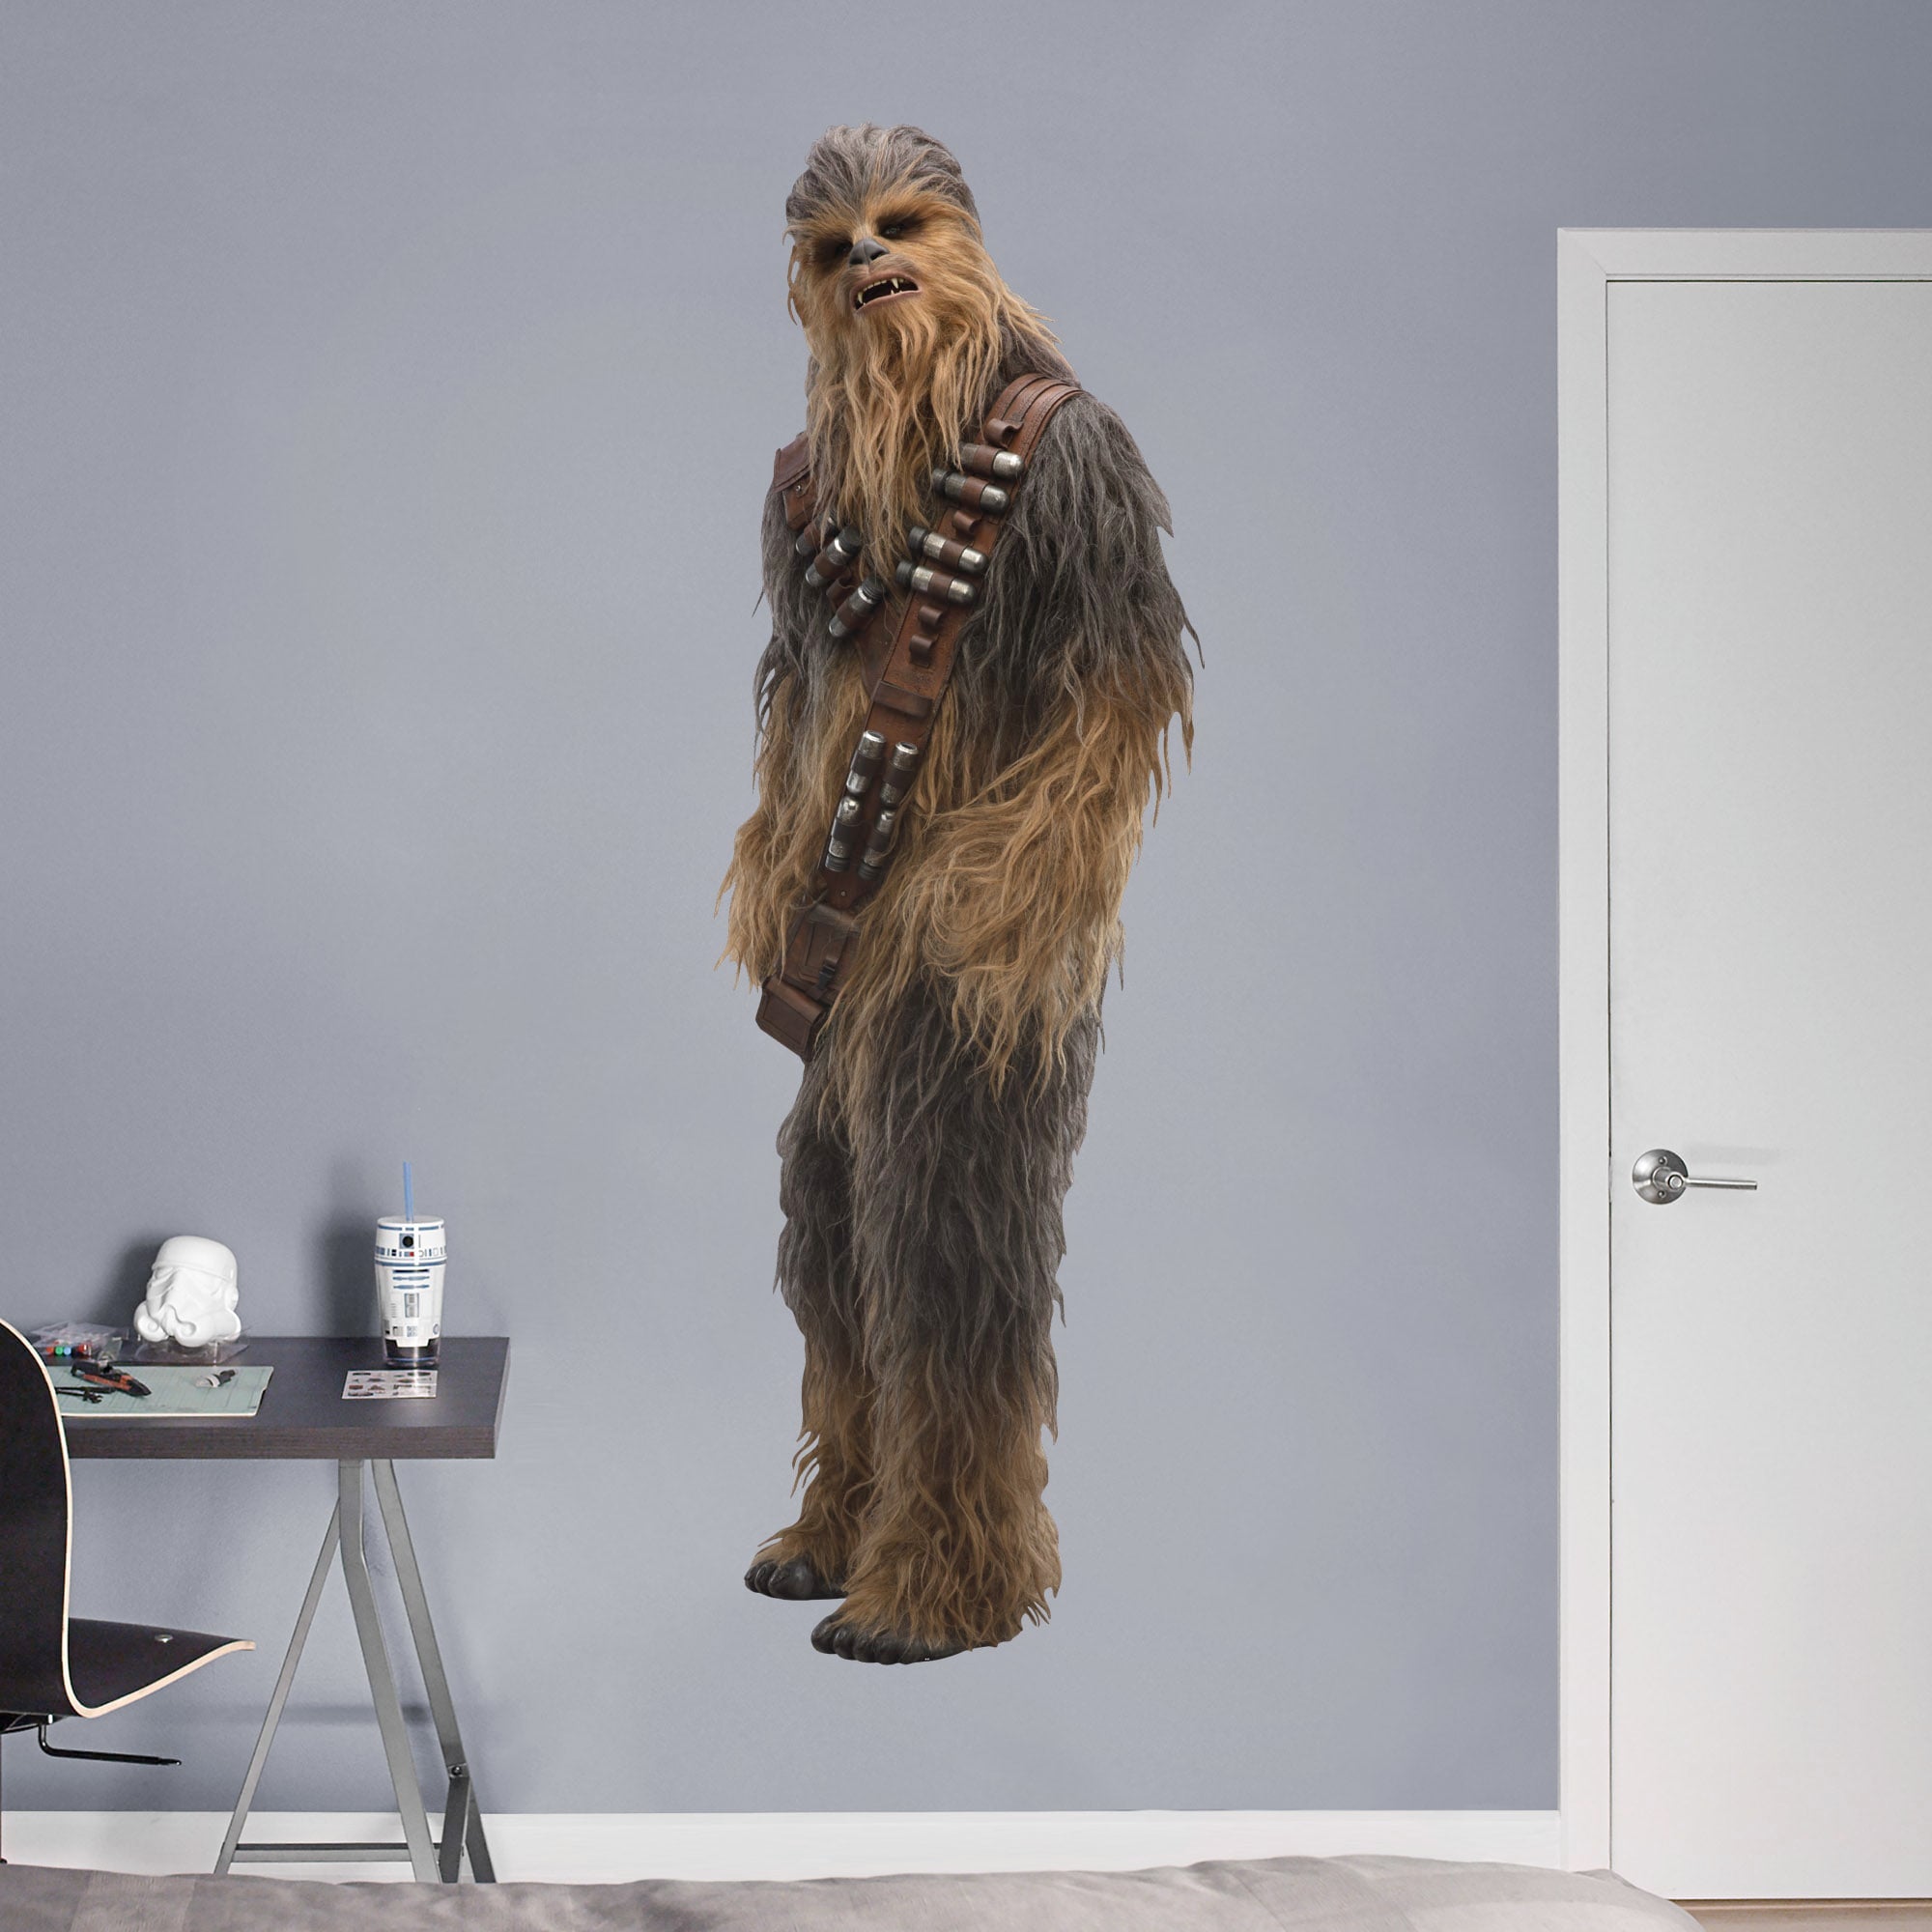 Chewbacca - Solo: A Star Wars Story - Officially Licensed Removable Wall Decal